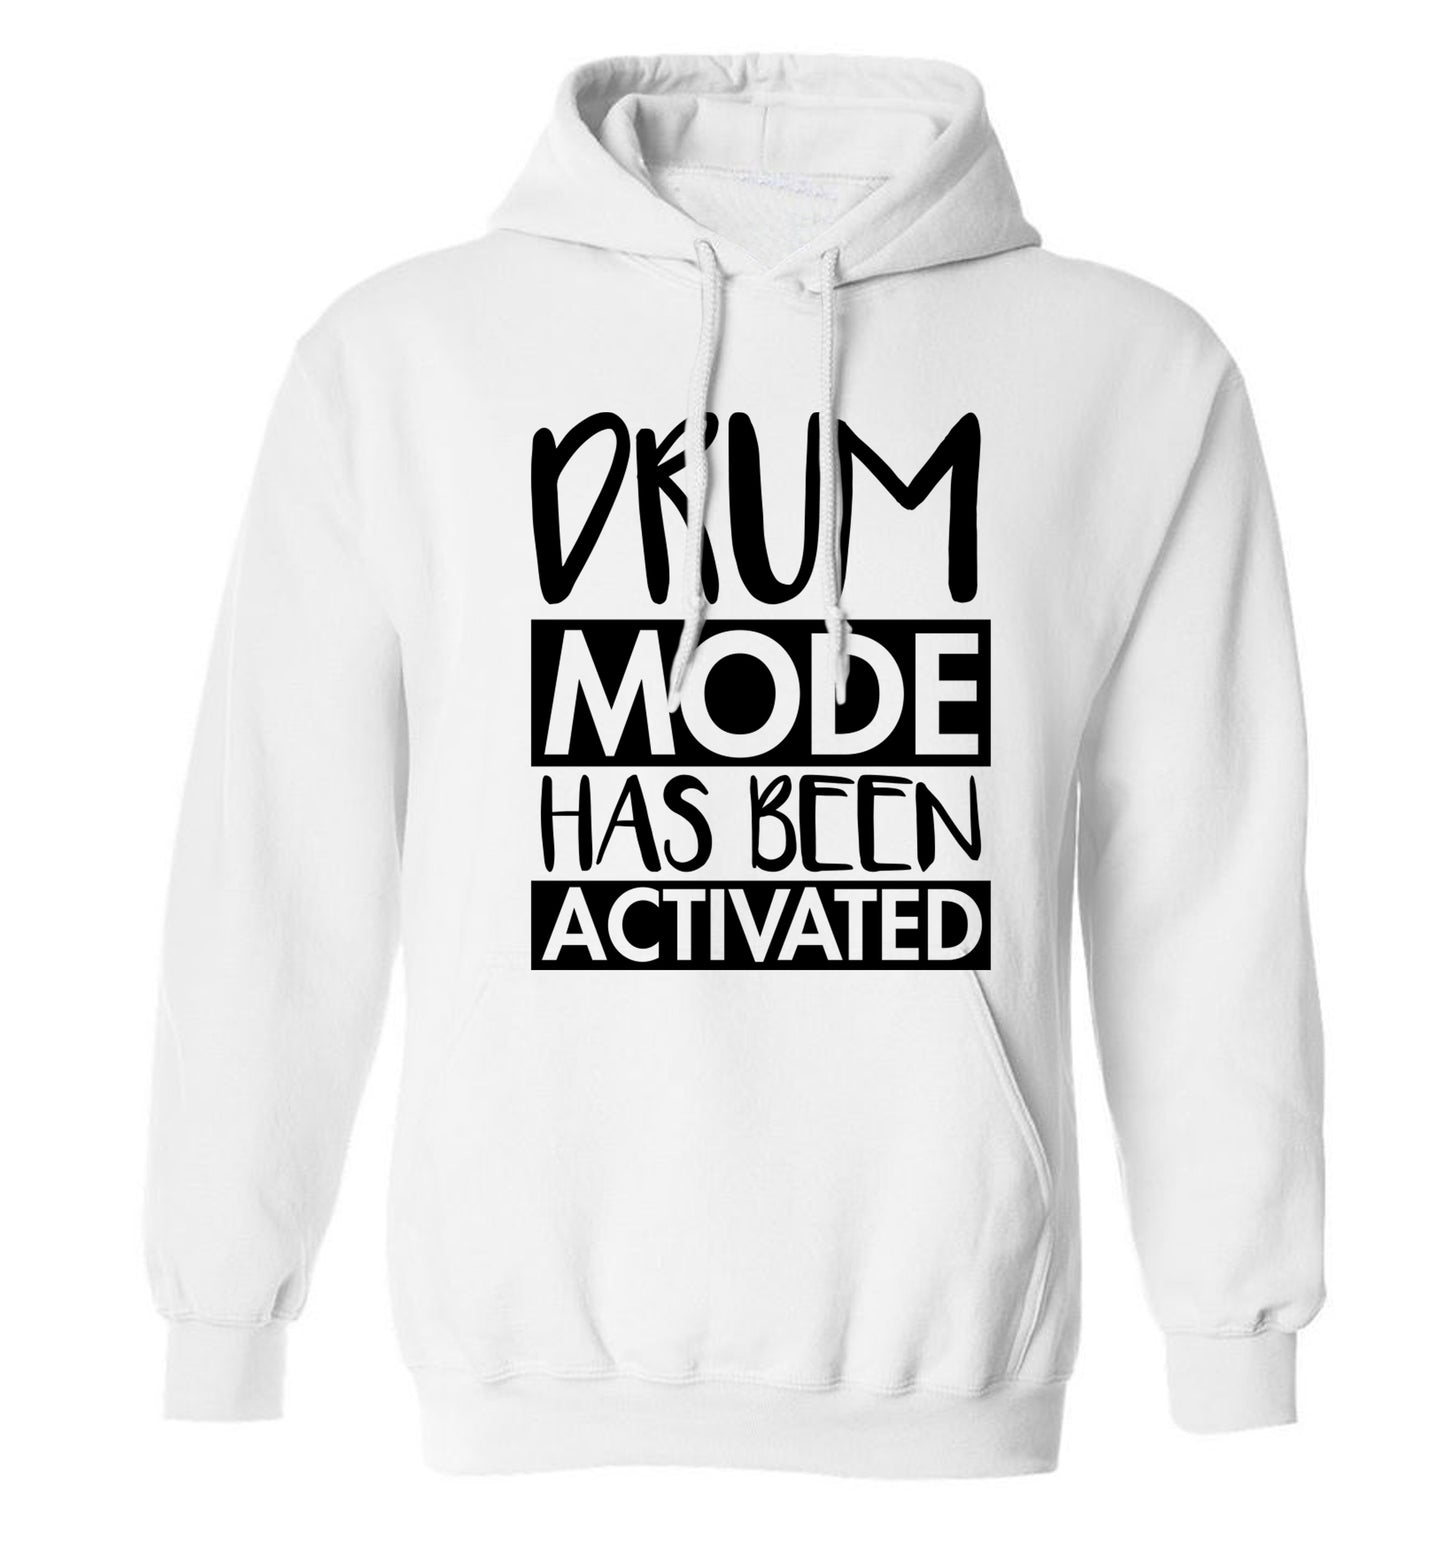 Drum mode activated adults unisexwhite hoodie 2XL